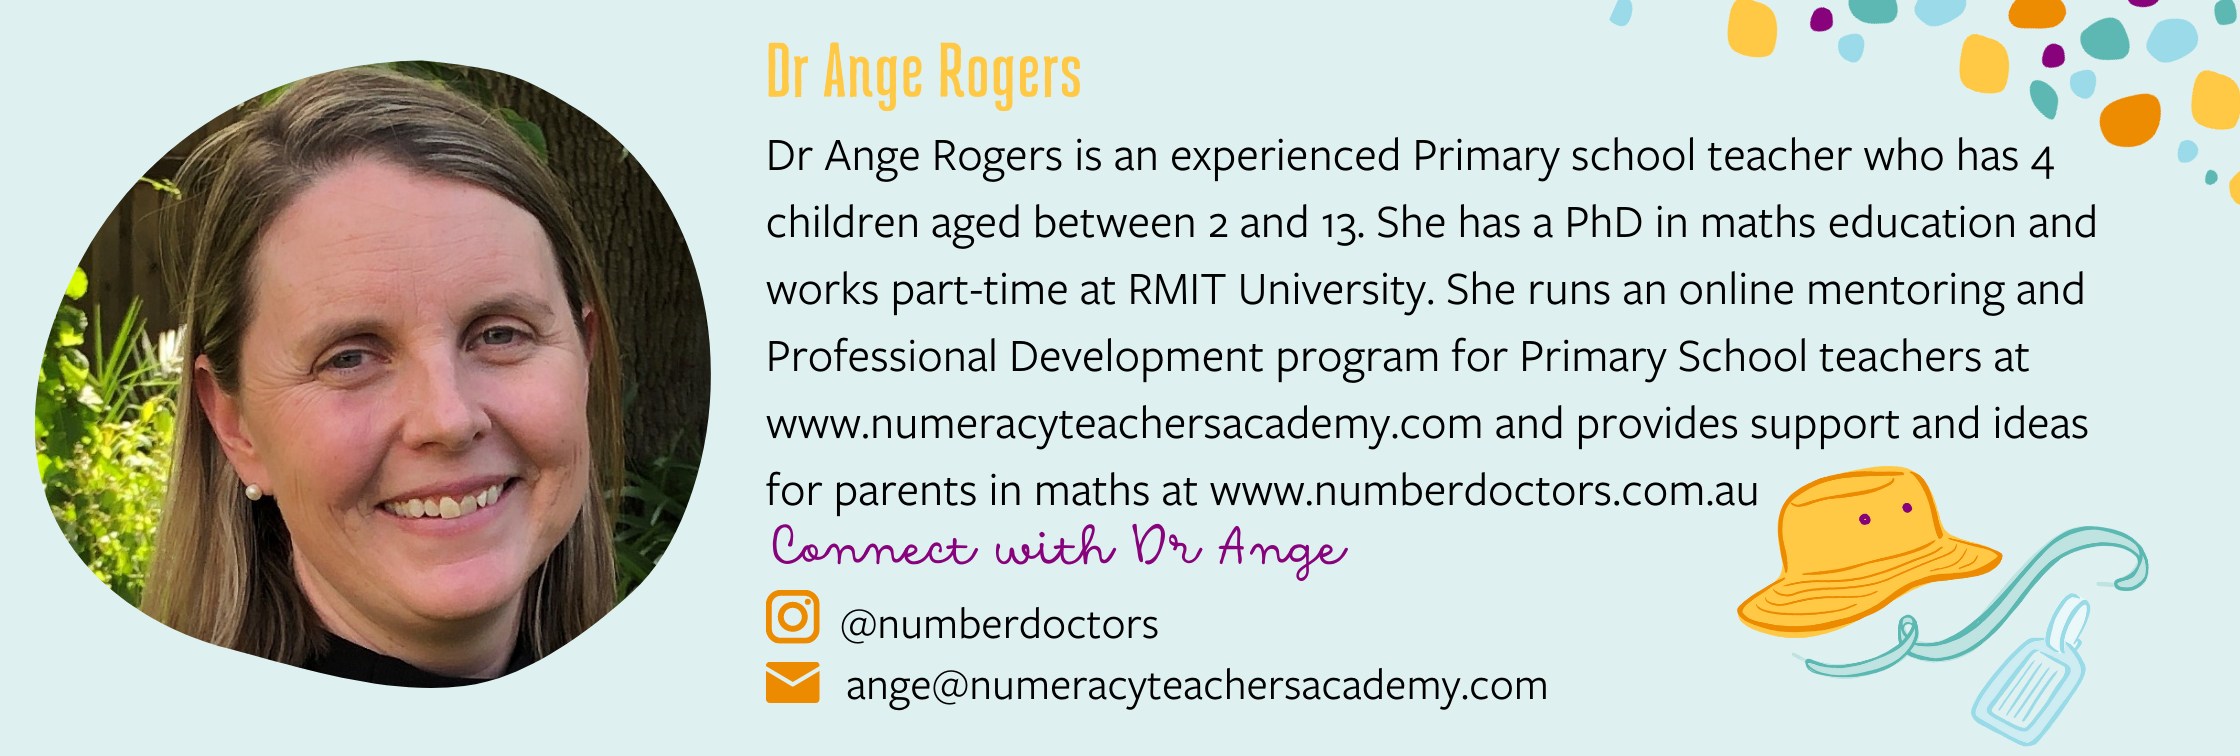 Dr Ange Rogers About Me & Image